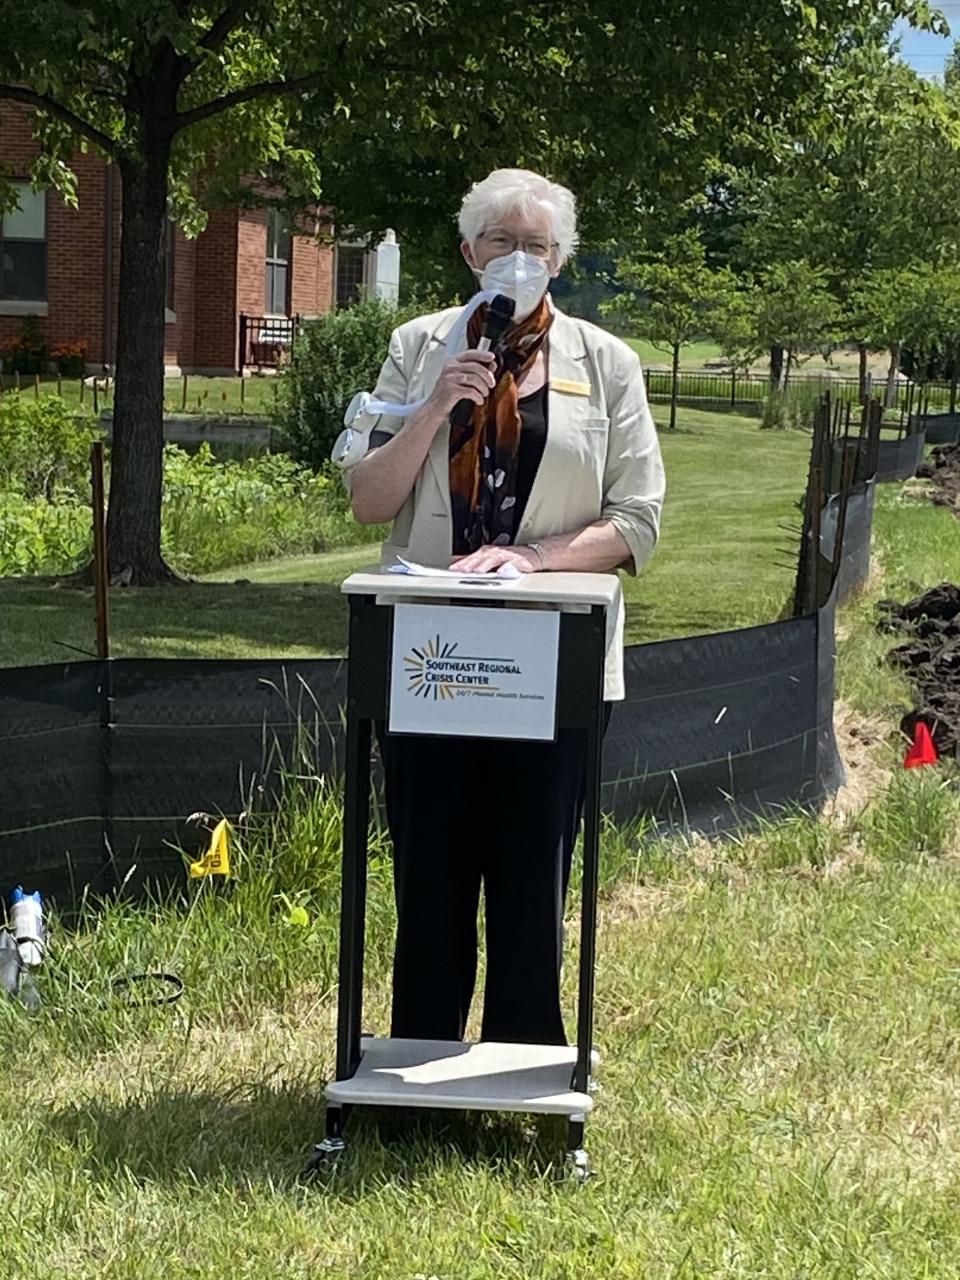 Commissioner Podulke standing in front of a podium speaking into a microphone at SERCC groundbreaking